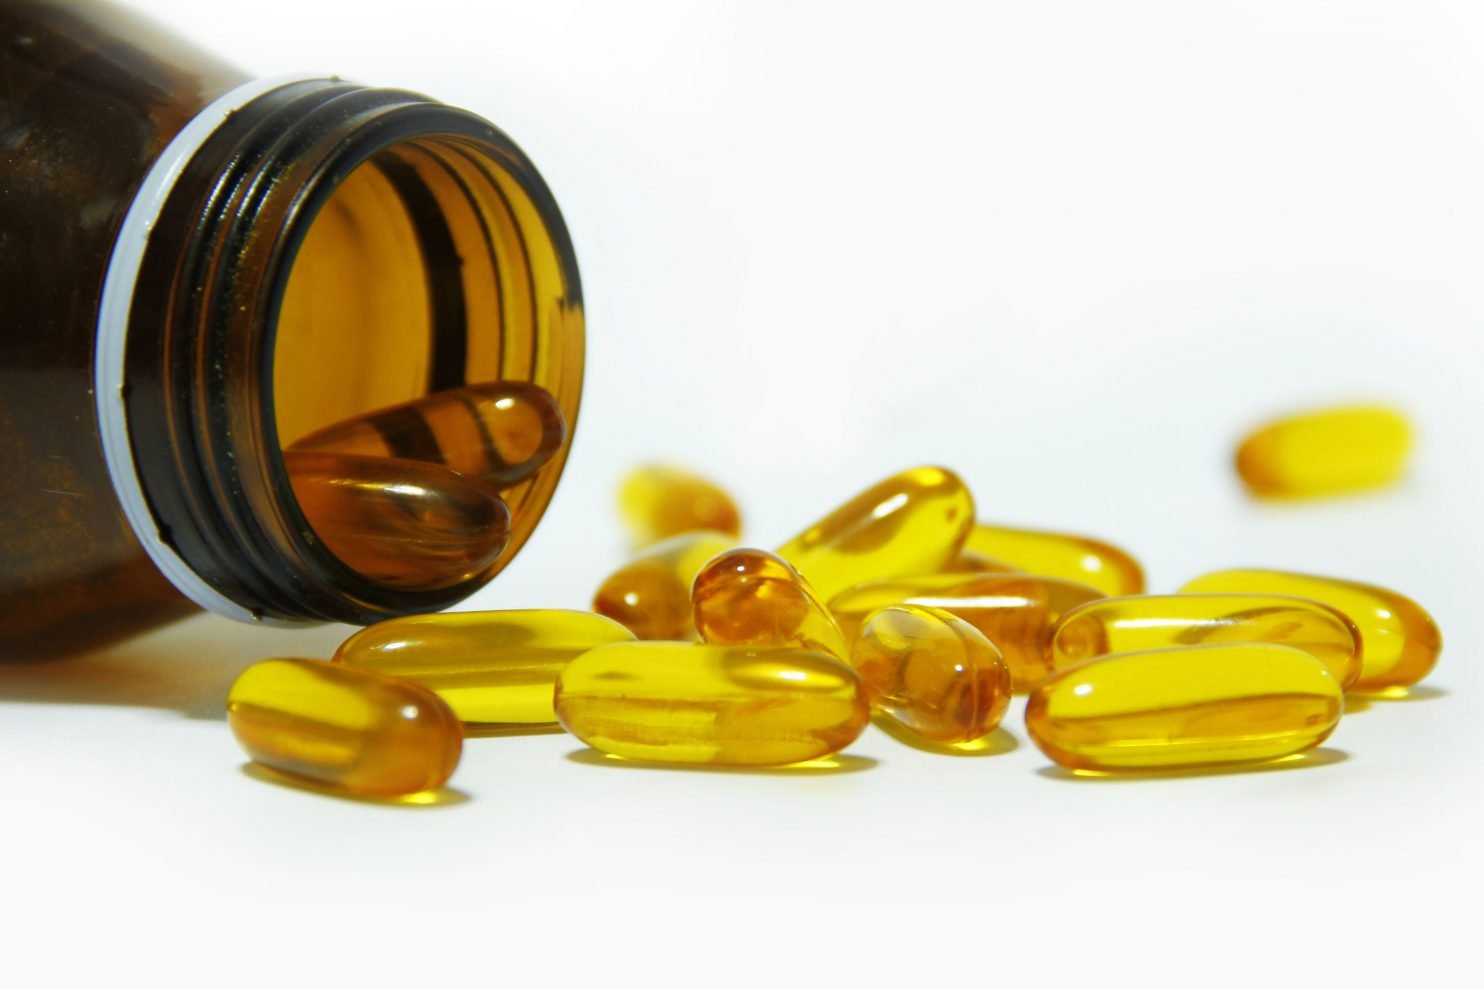 How To Dietary Supplement Precautions